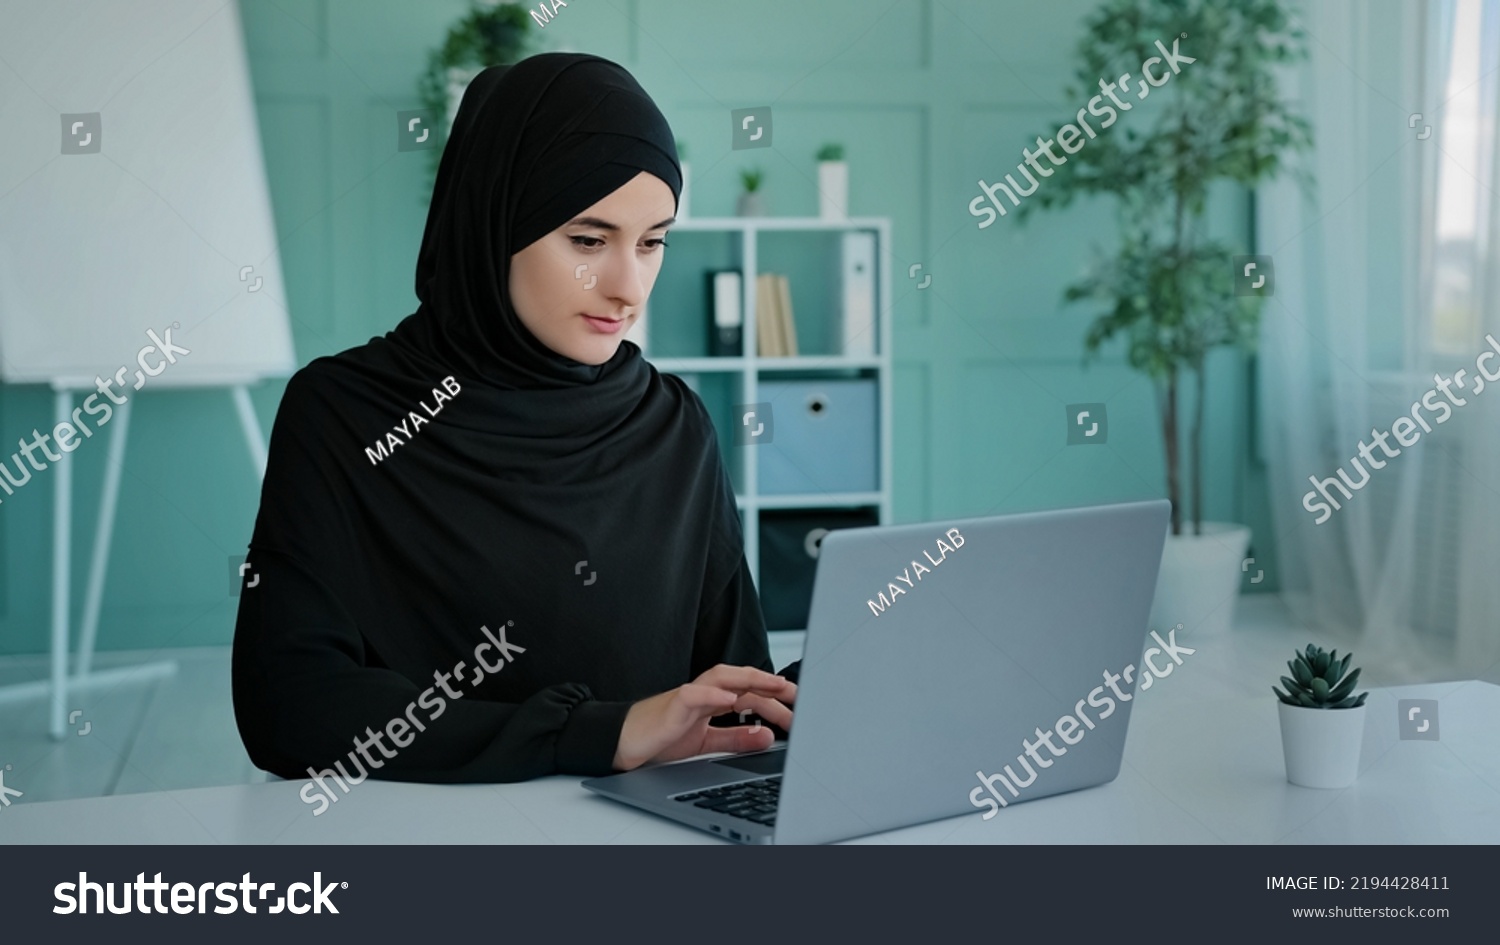 Busy Islam businesswoman in black hijab freelancer Islamic Arabian girl student worker Muslim woman female with laptop working e-learning typing online chat e-commerce app web browsing in network #2194428411